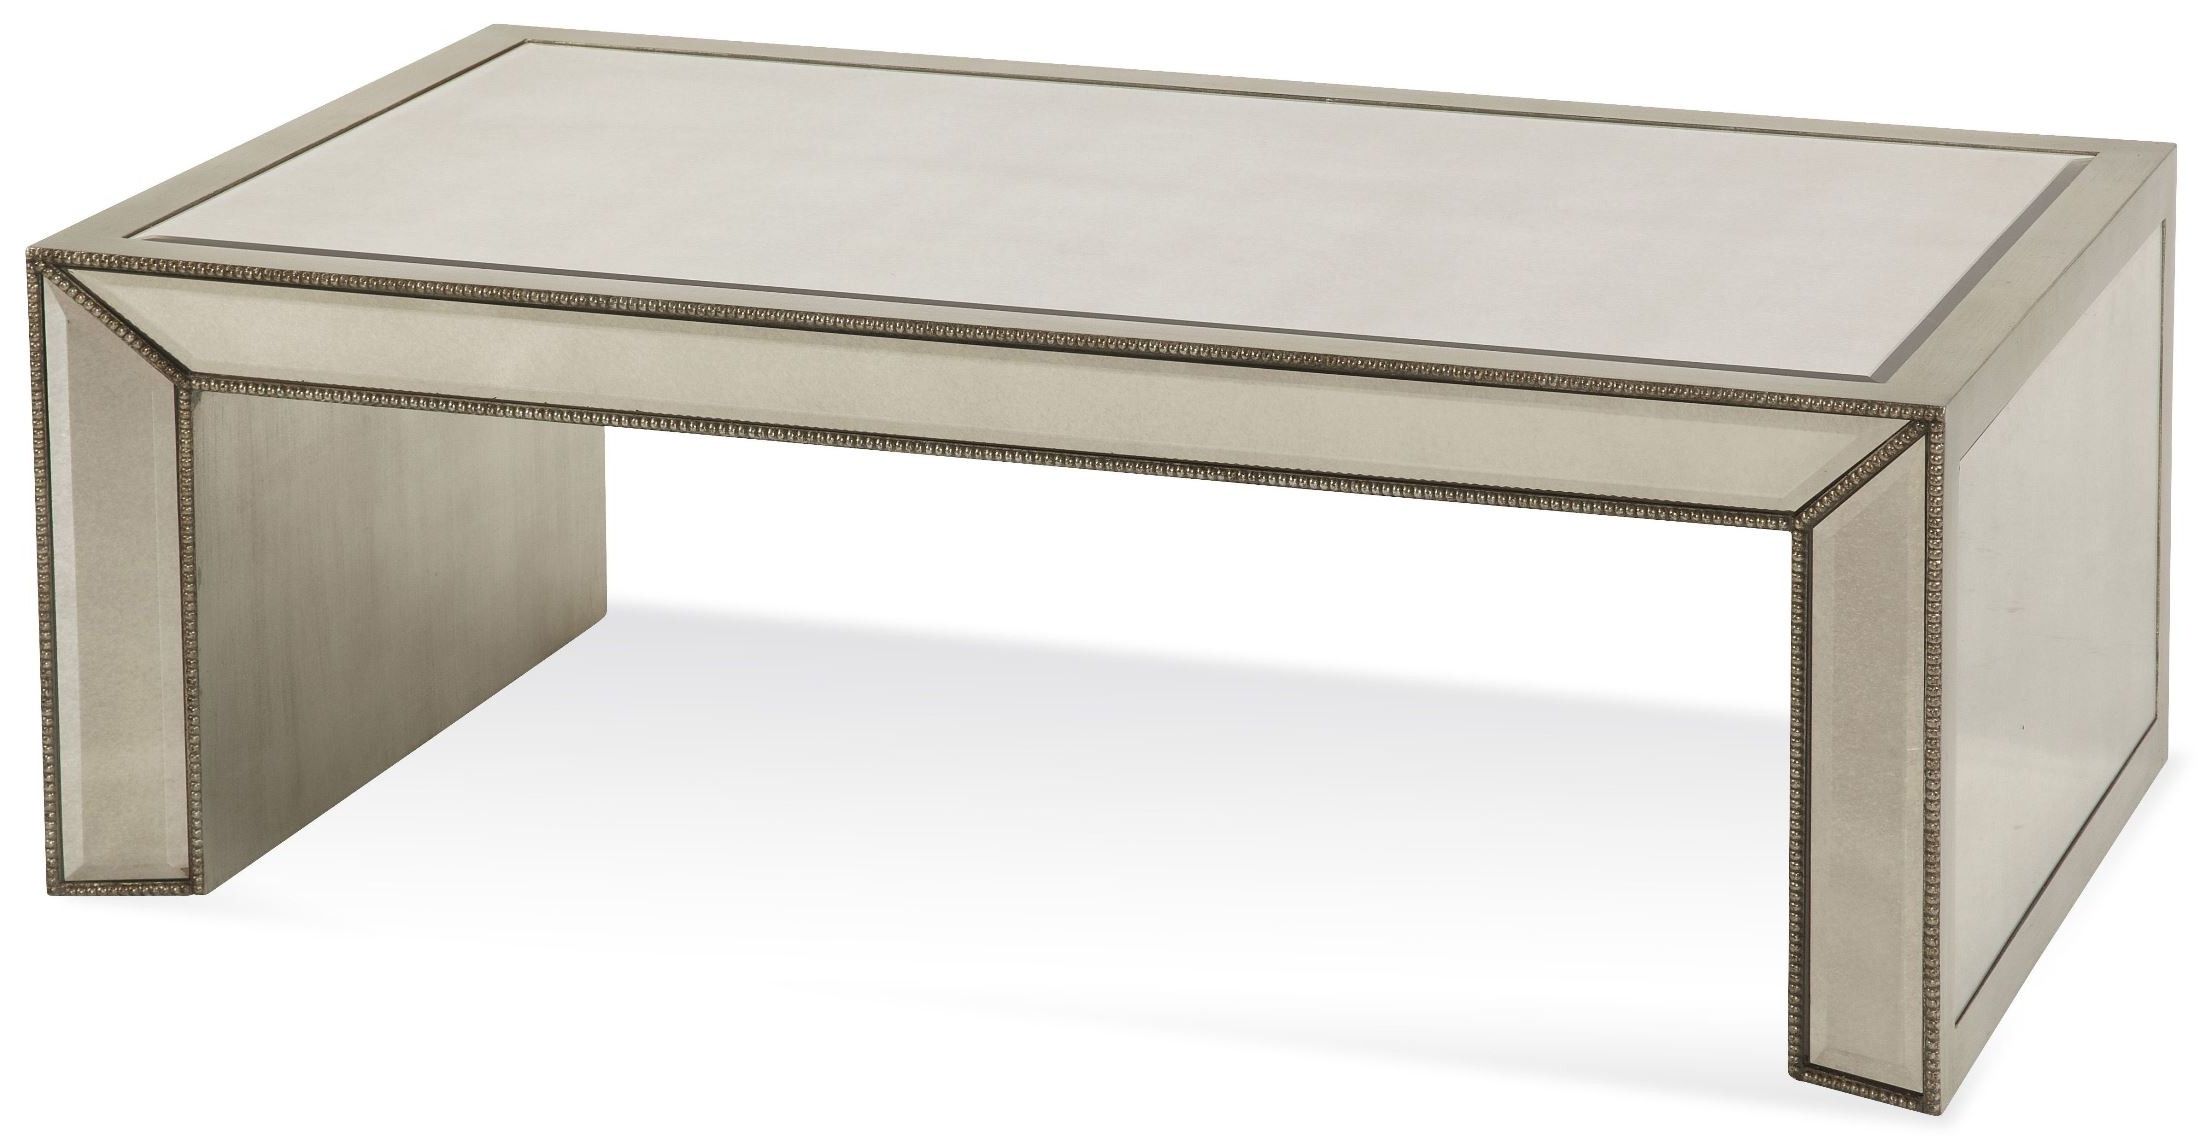 2018 Mirrored And Silver Cocktail Tables Throughout Murano Antique Mirrored Rectangular Cocktail Table, T (View 1 of 20)